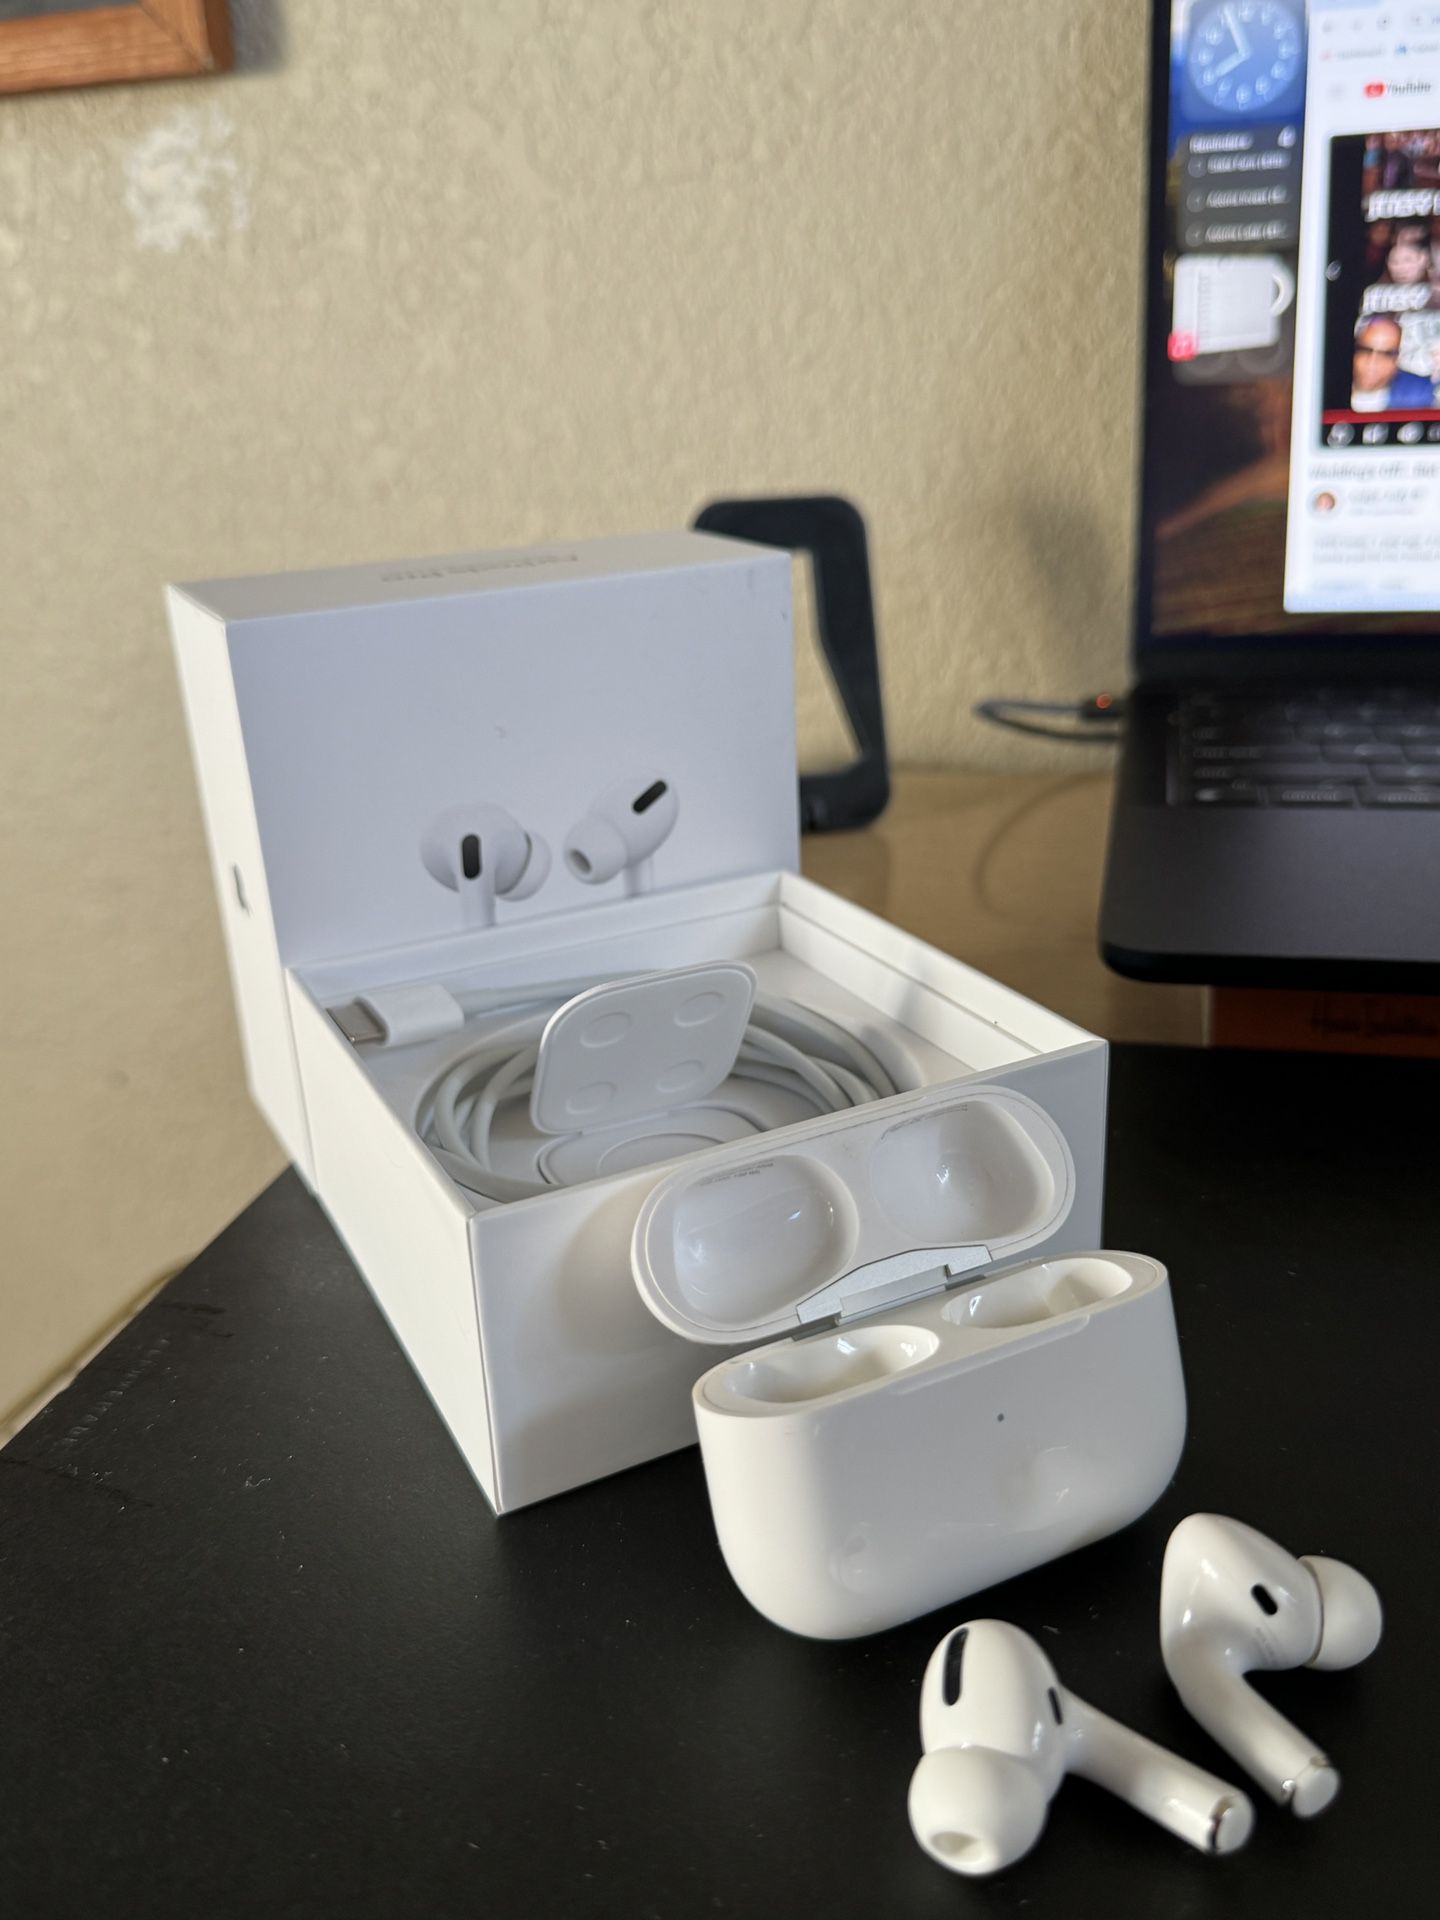 Used AirPods Pro 1 In very good condition $80